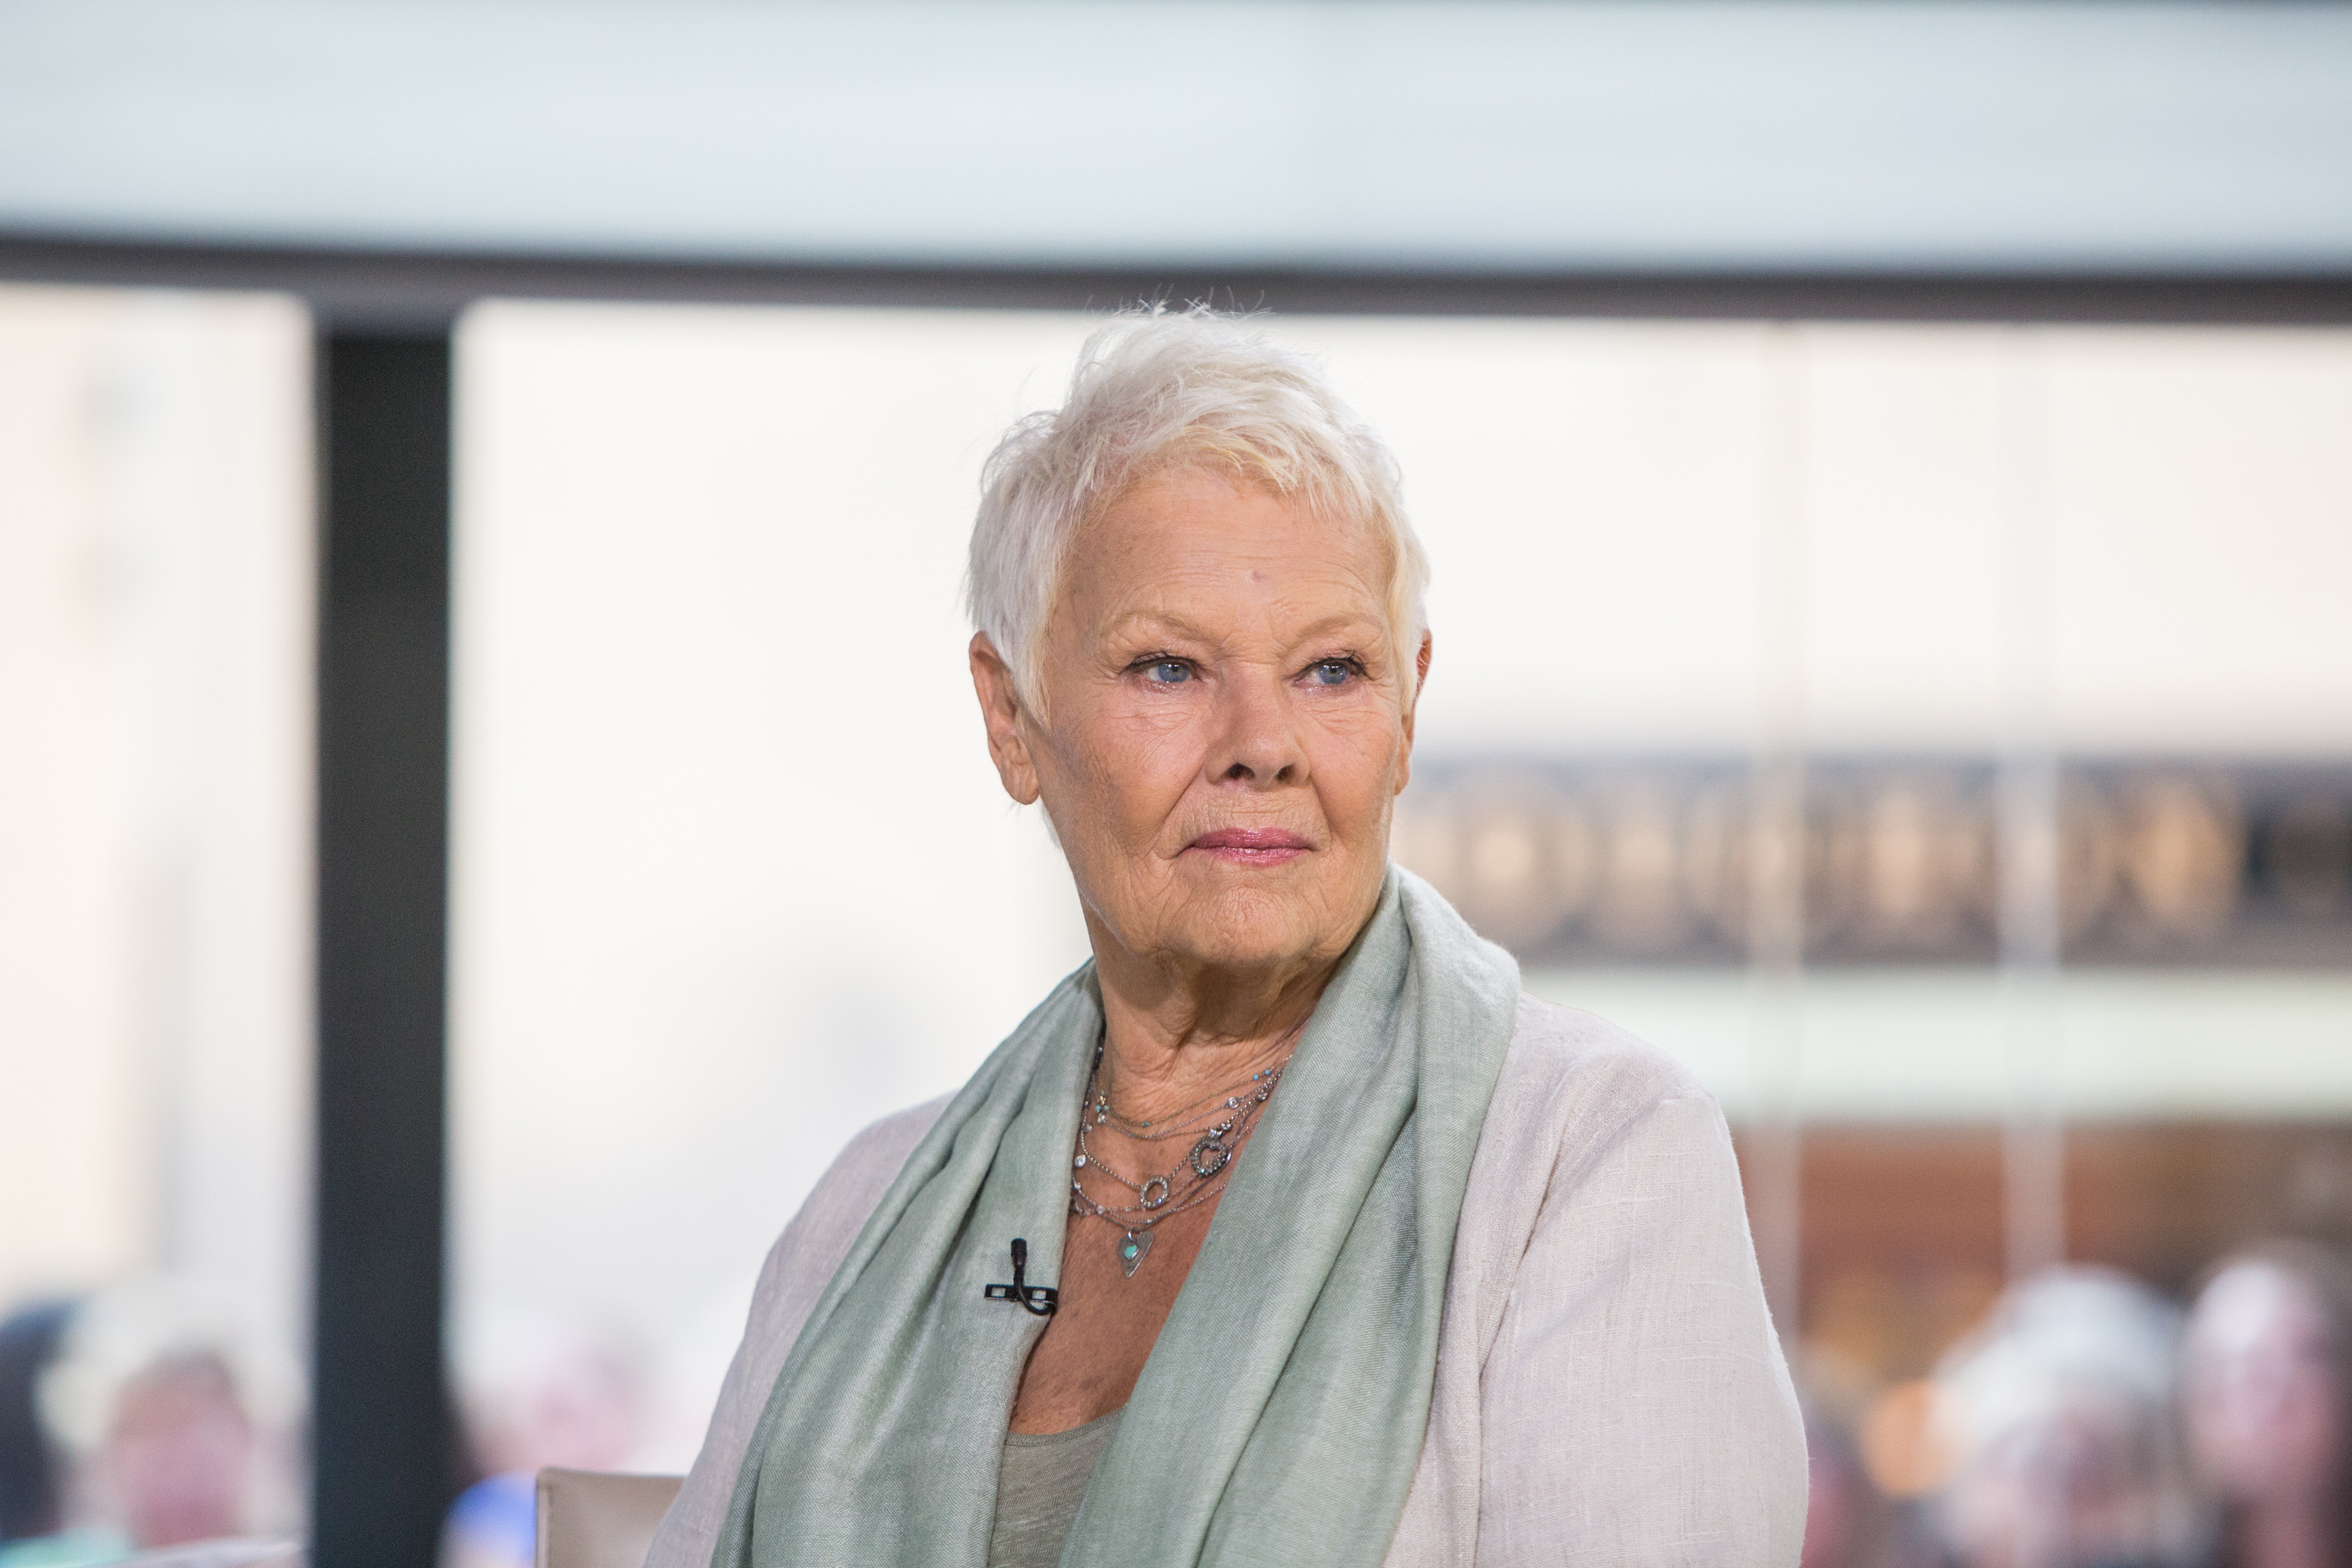 Judi Dench bei "TODAY" am 15. September 2017. | Quelle: Getty Images